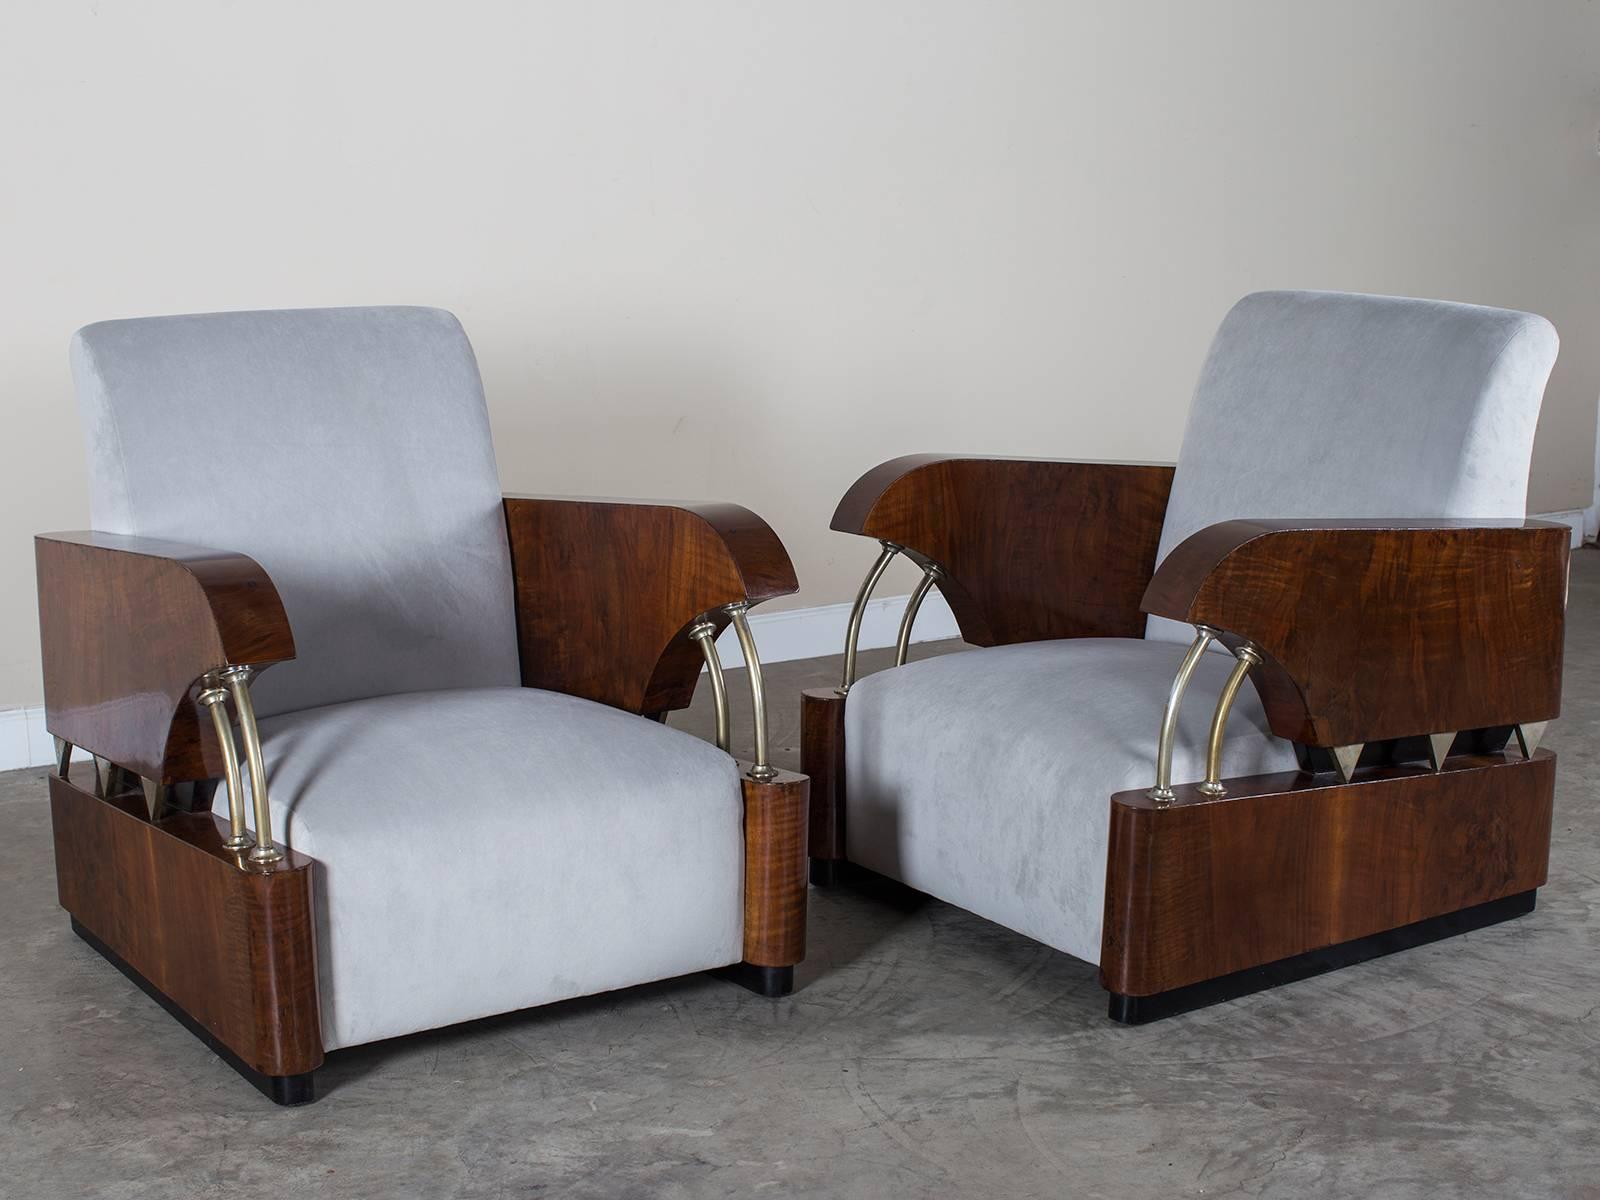 Receive our new selections direct from 1stdibs by email each week. Please click Follow Dealer below and see them first!

A pair of sensational vintage French Art Deco period walnut and metal armchairs circa 1930. Their unique appearance is